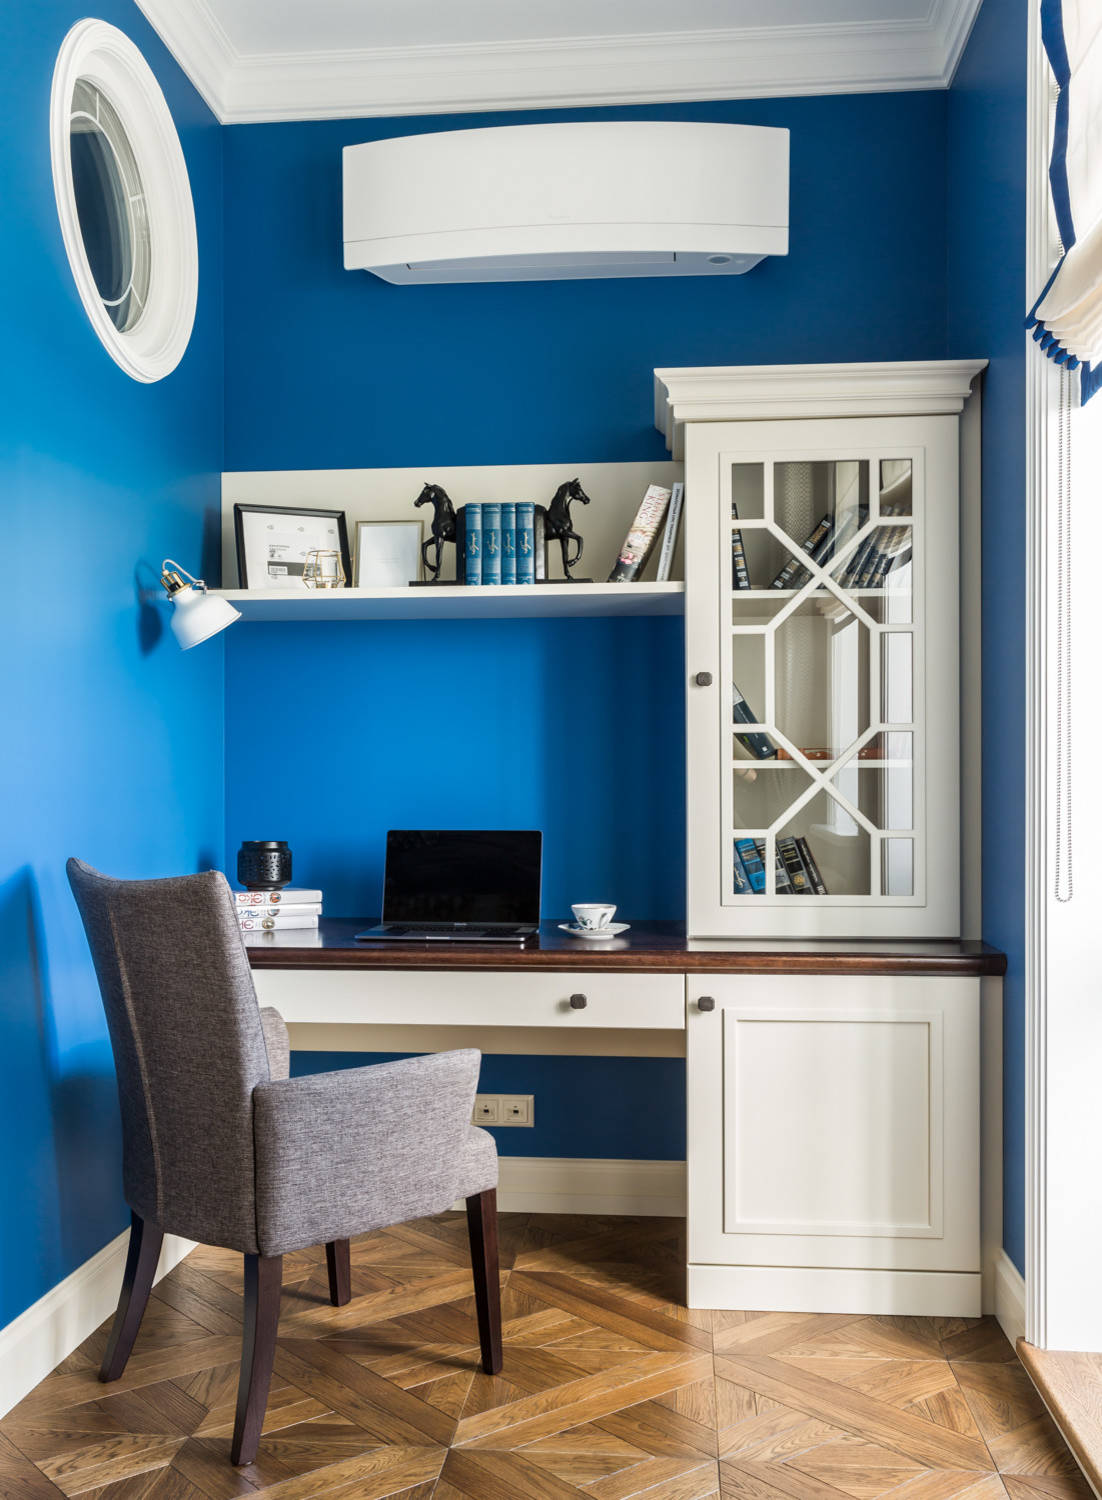 75 Wallpaper Home Office Ideas You'll Love - February, 2023 | Houzz